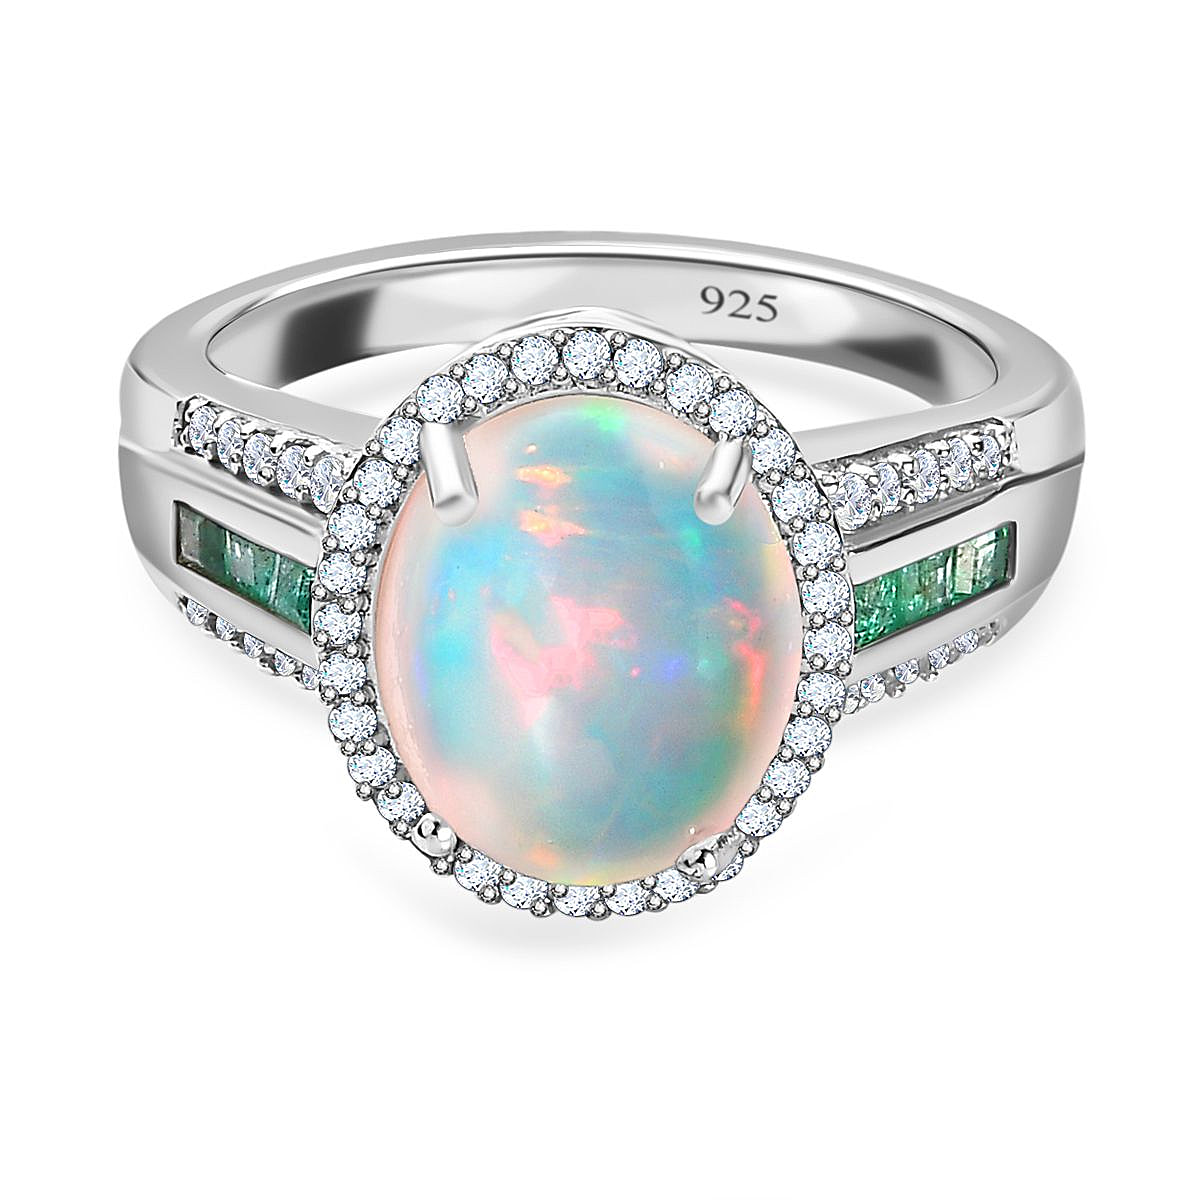 Ethiopian Welo Opal, Zambian Emerald and Natural Zircon Ring in Platinum Overlay Sterling Silver 3.18 Ct.